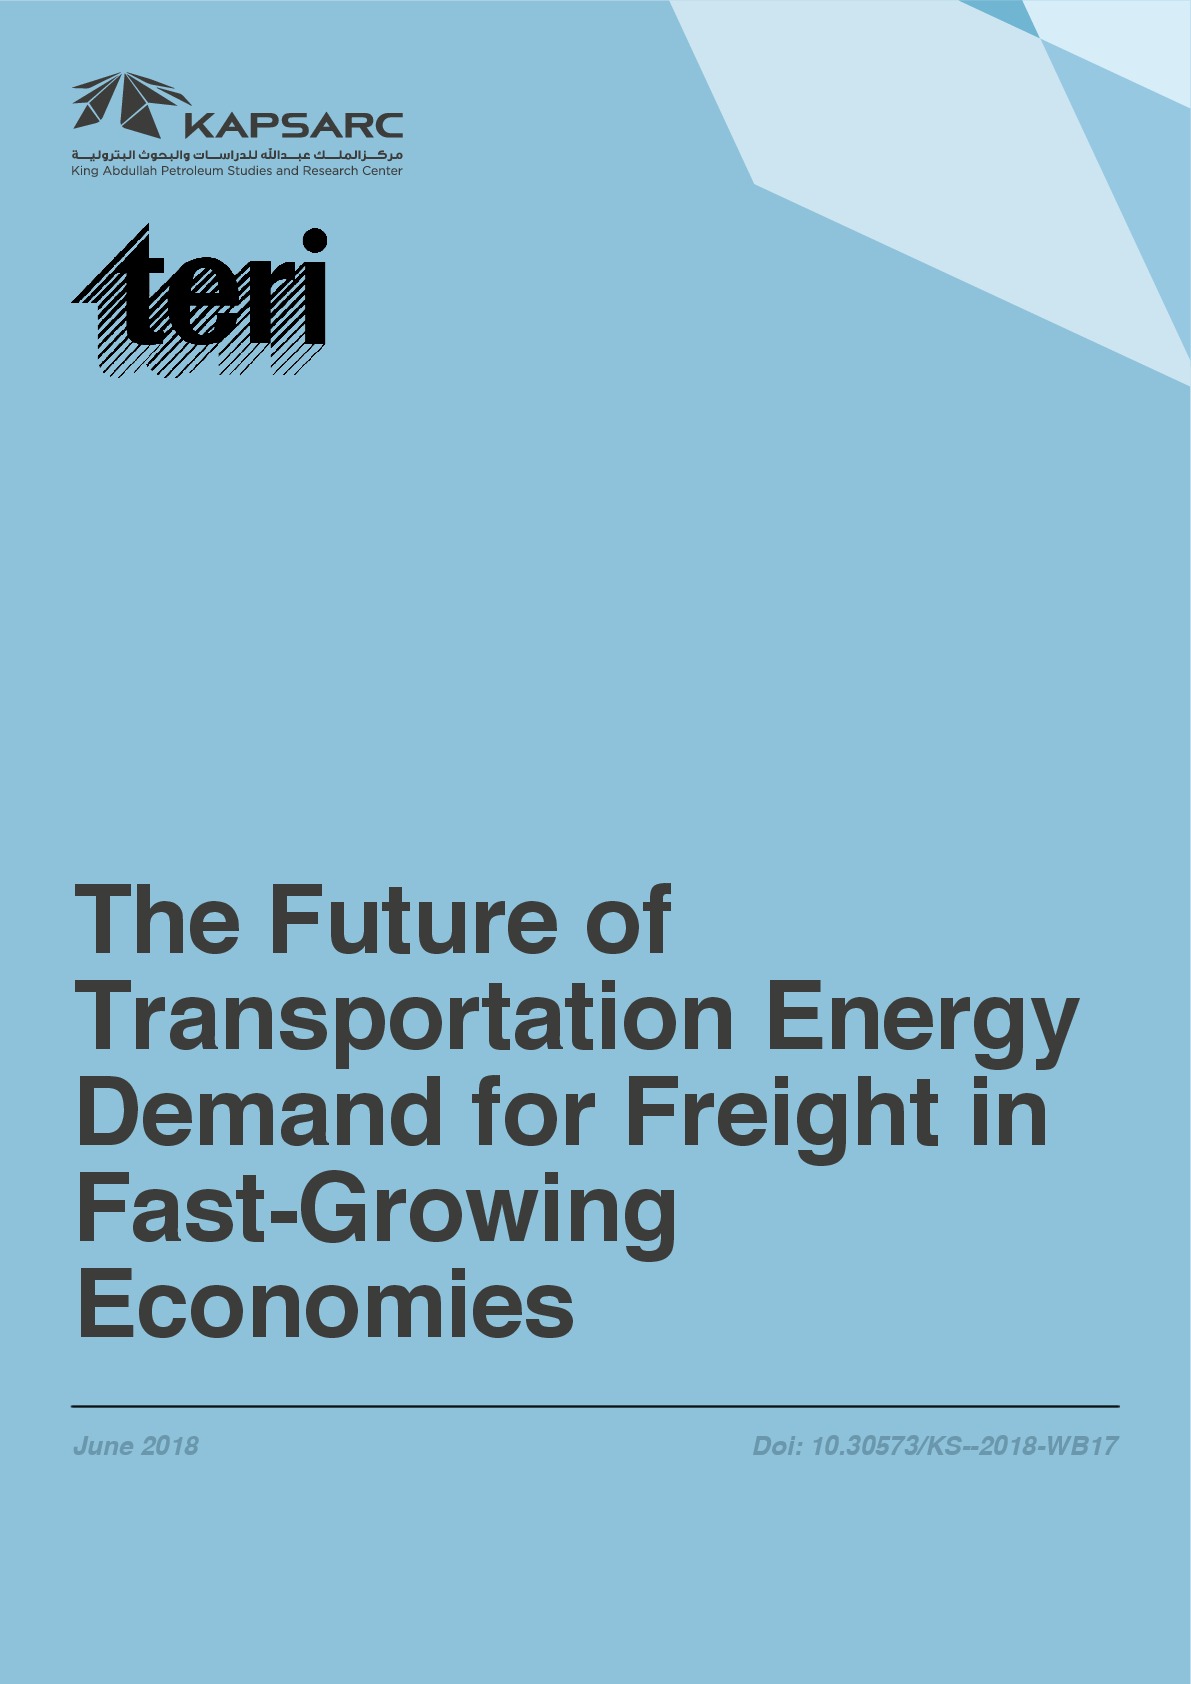 The Future of Transportation Energy Demand for Freight in Fast-Growing Economies